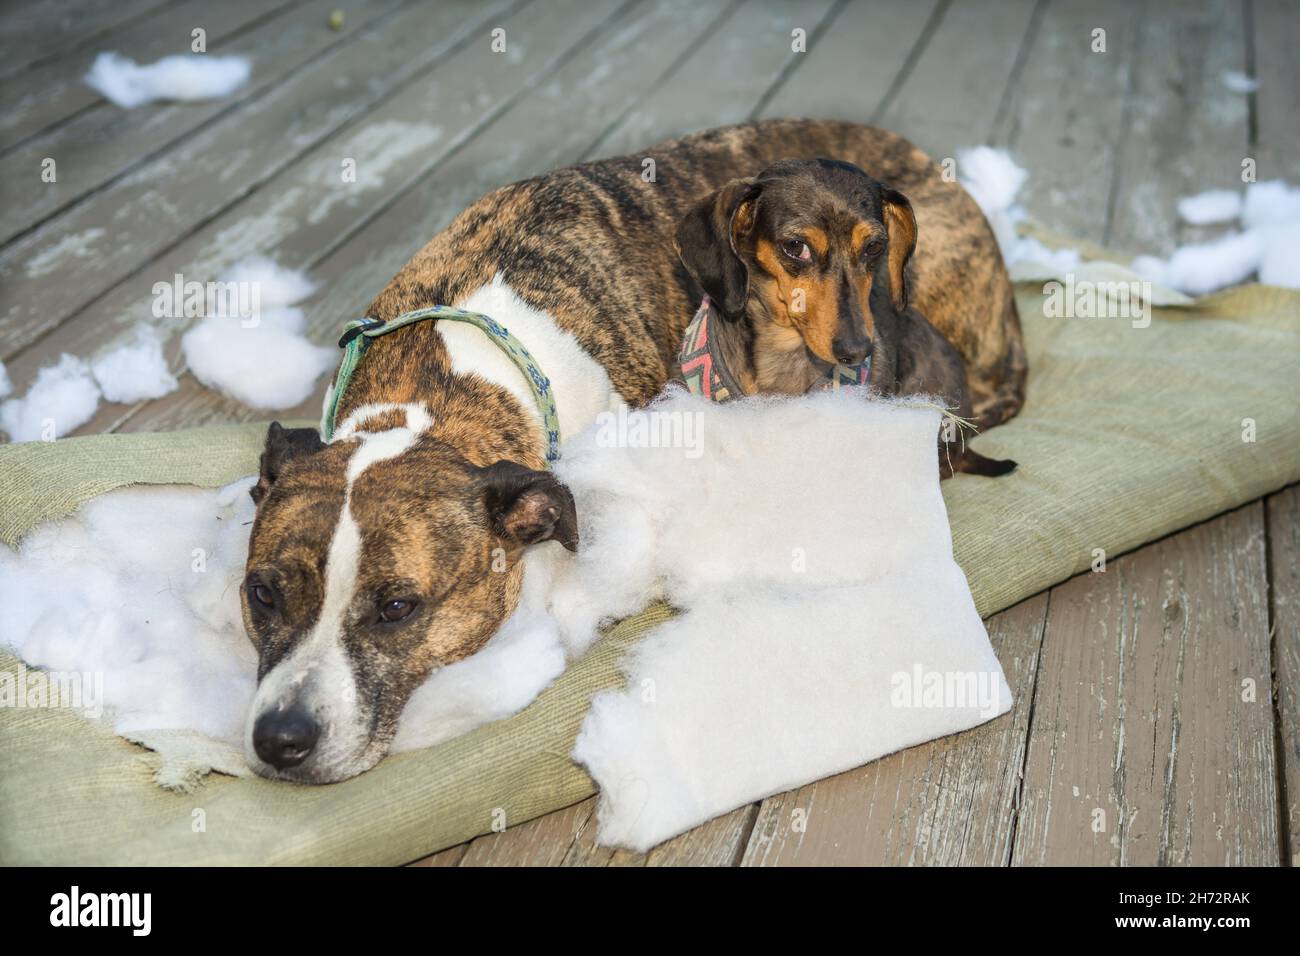 Dogs Destroy Lawn Furniture Stock Photo